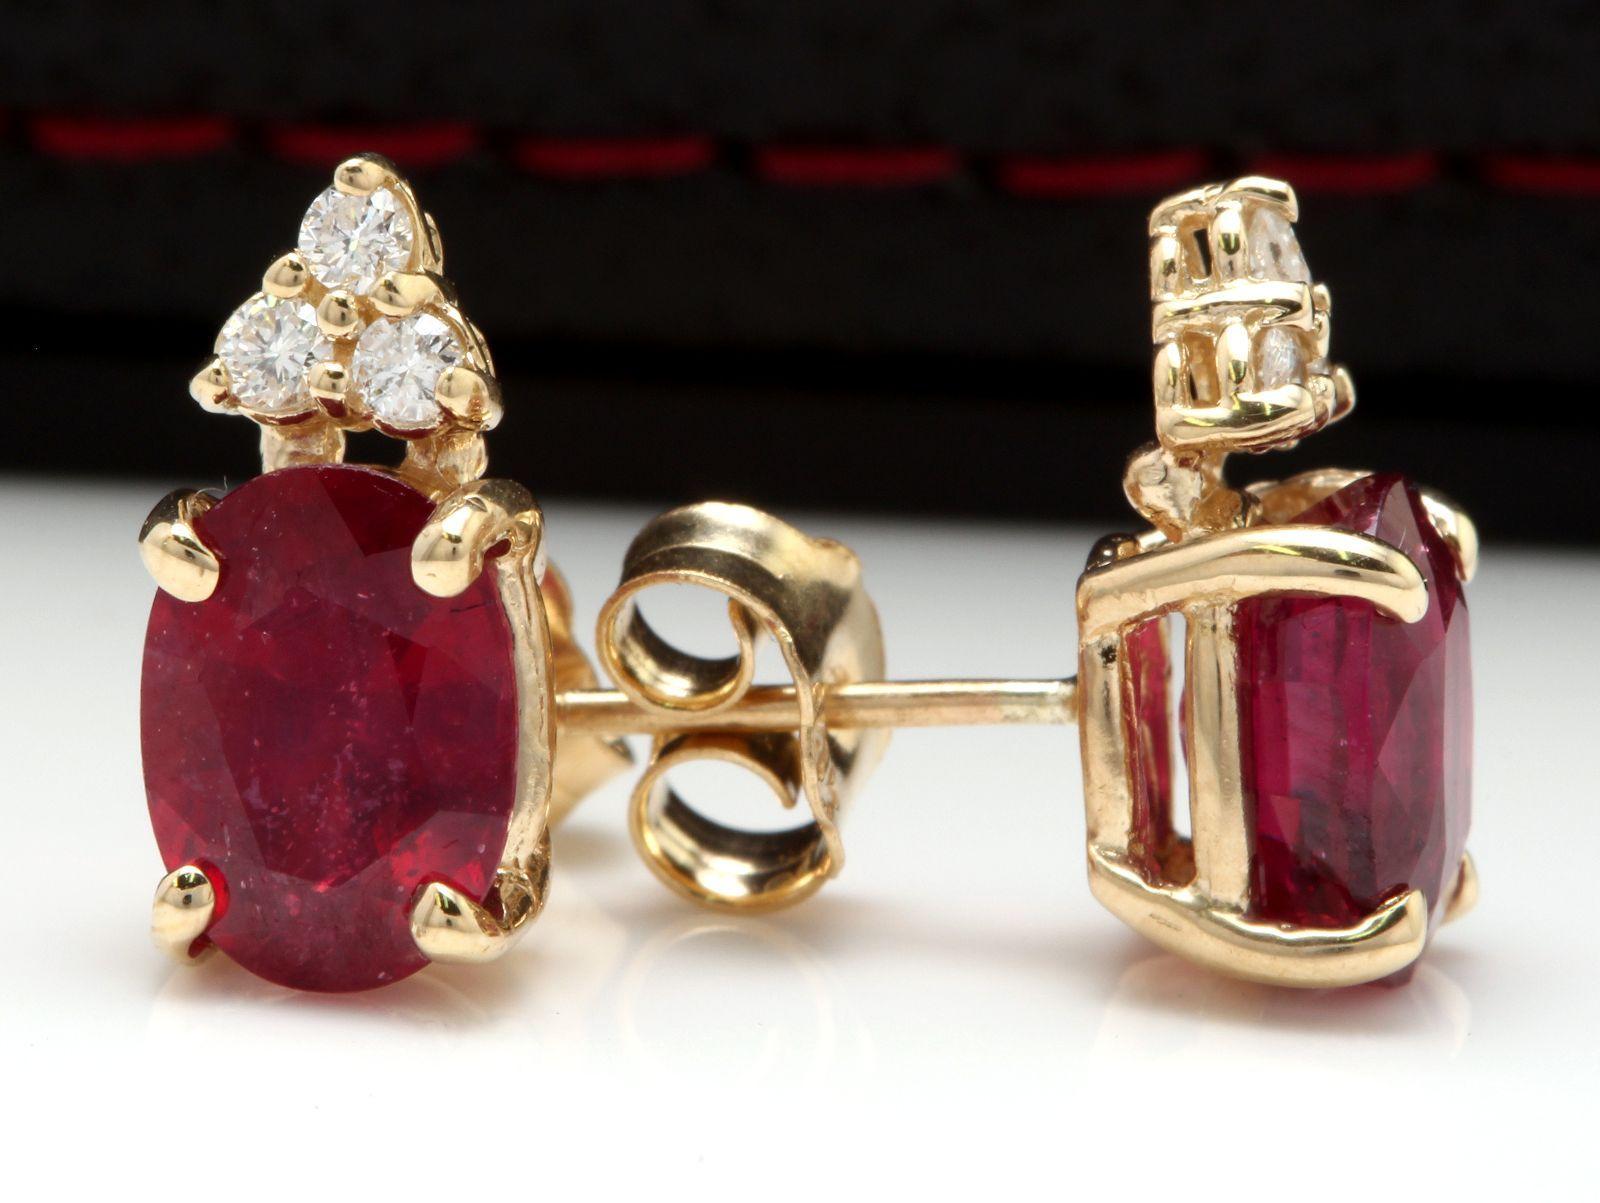 Exquisite 4.20 Carats Red Ruby and Diamond 14K Solid Yellow Gold Stud Earrings

Amazing looking piece!

Total Natural Round Cut White Diamonds Weight: Approx. 0.20 Carats (color G-H / Clarity S1-SI2)

Total Oval Cut Red Rubies Weight: Approx. 4.00